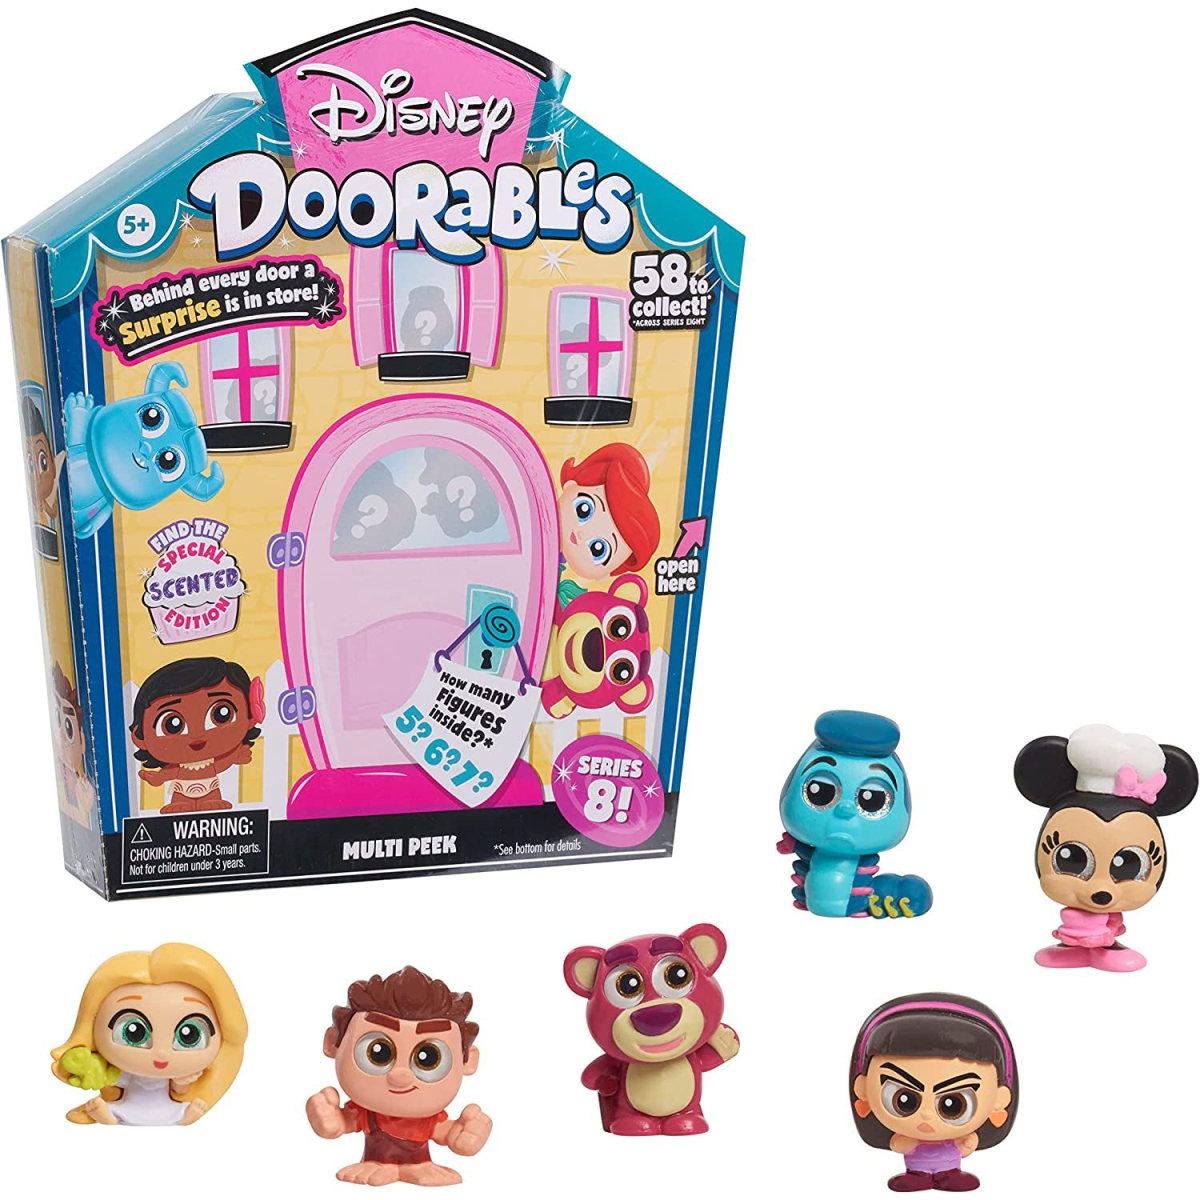 Disney Doorables Multi Peek, Series 8 Featuring Special Edition Scented Figures, Styles May Vary, Officially Licensed Kids Toys